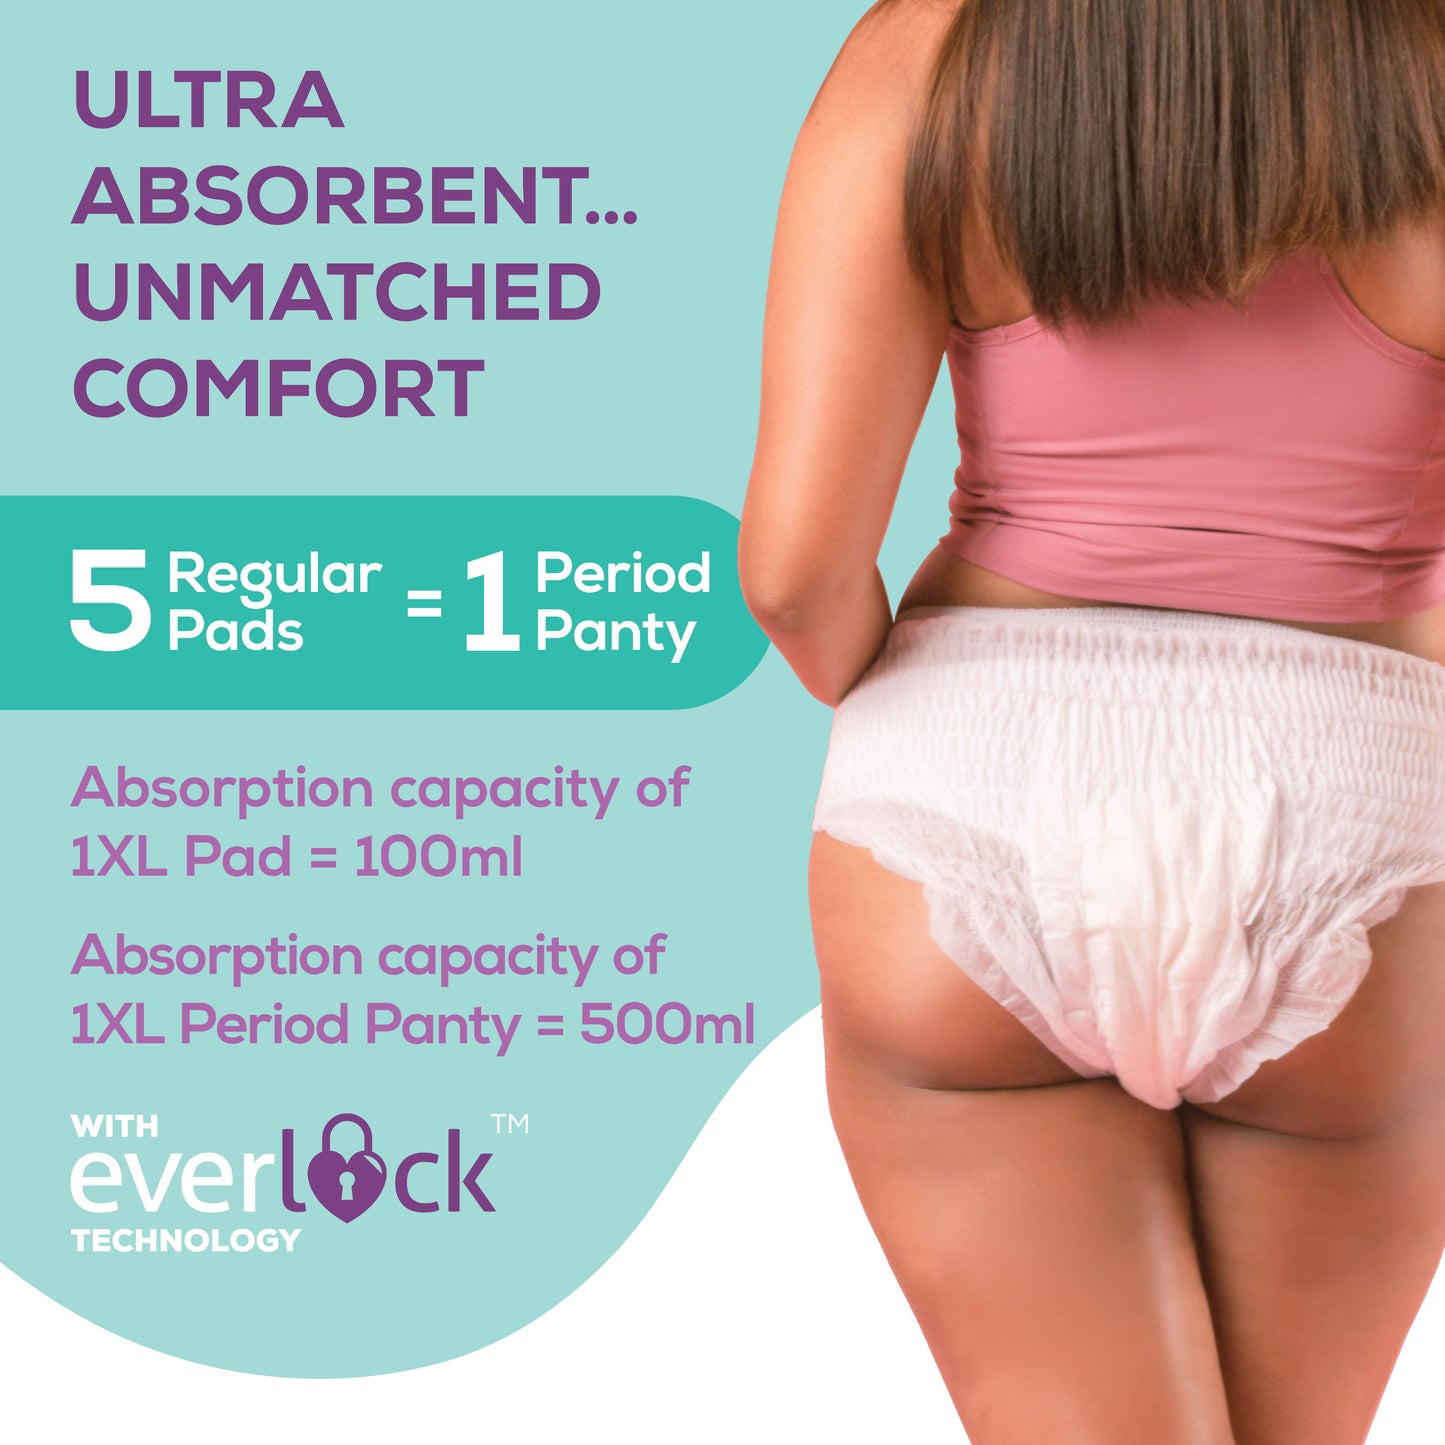 Evereve Ultra Absorbent Disposable Period Panties, XL-XXL, 10's Pack